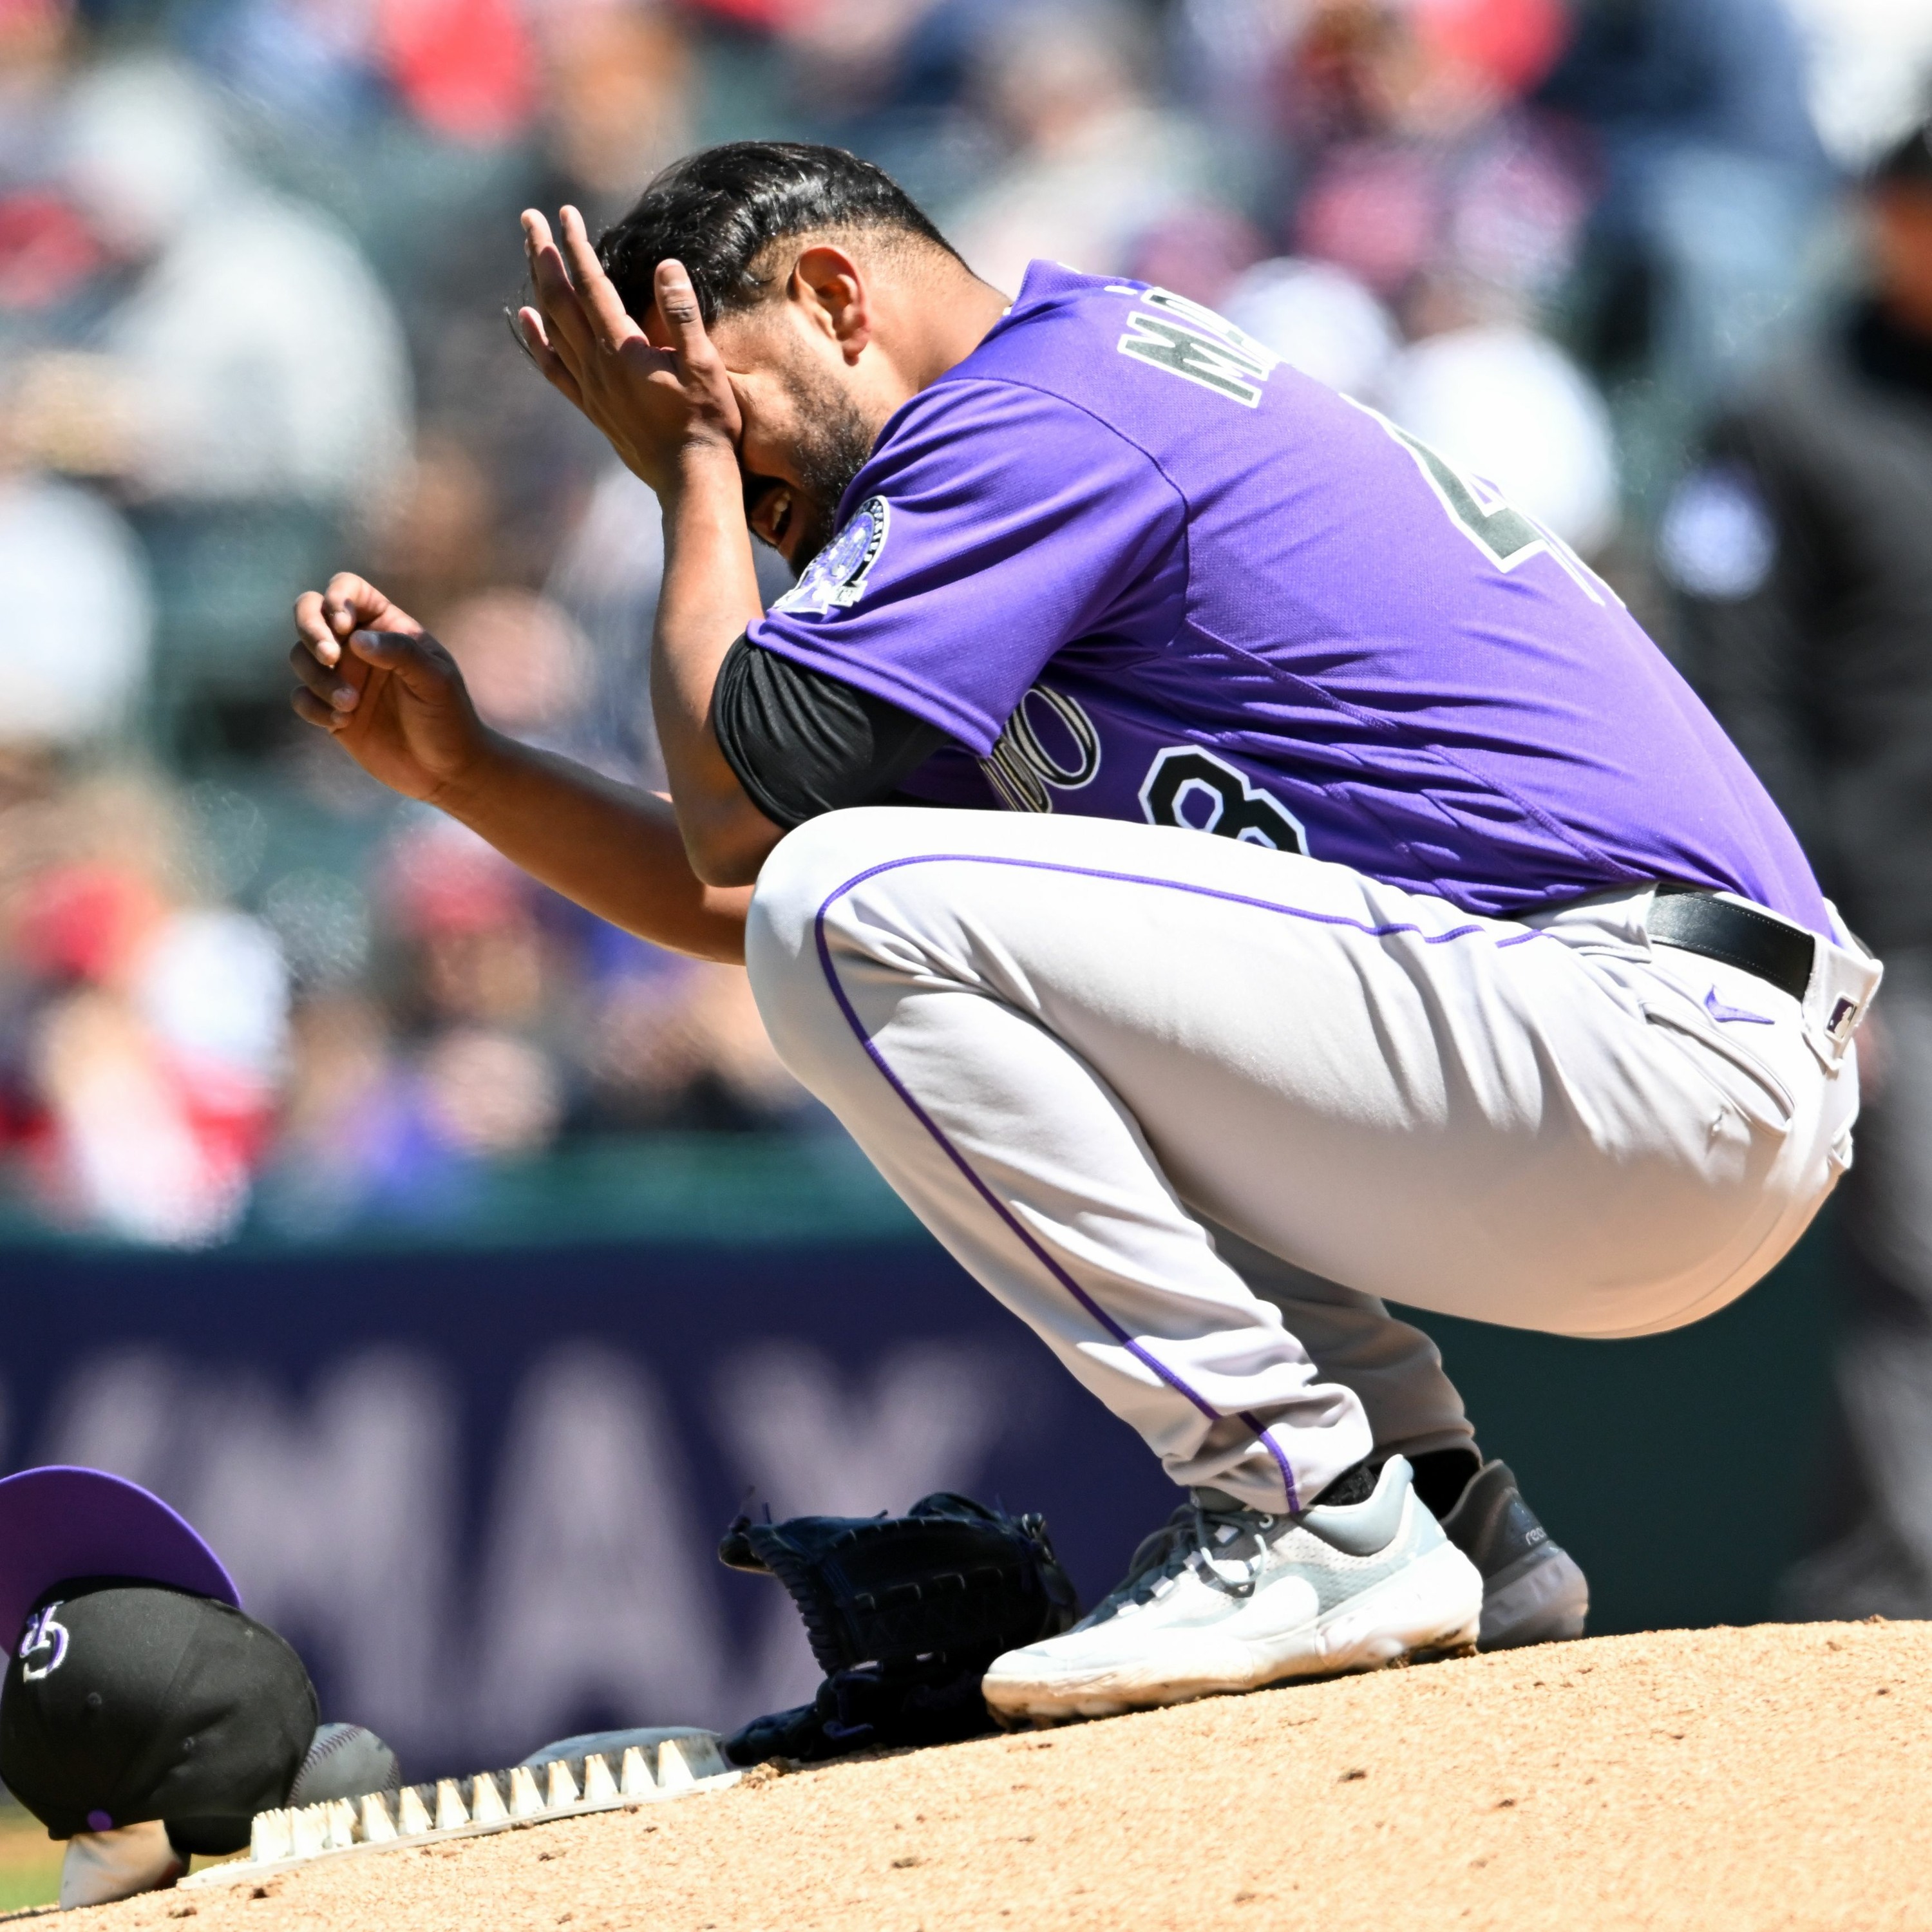 Ep. 201 -- German Marquez headed for Tommy John, Rockies on pace for 108 losses